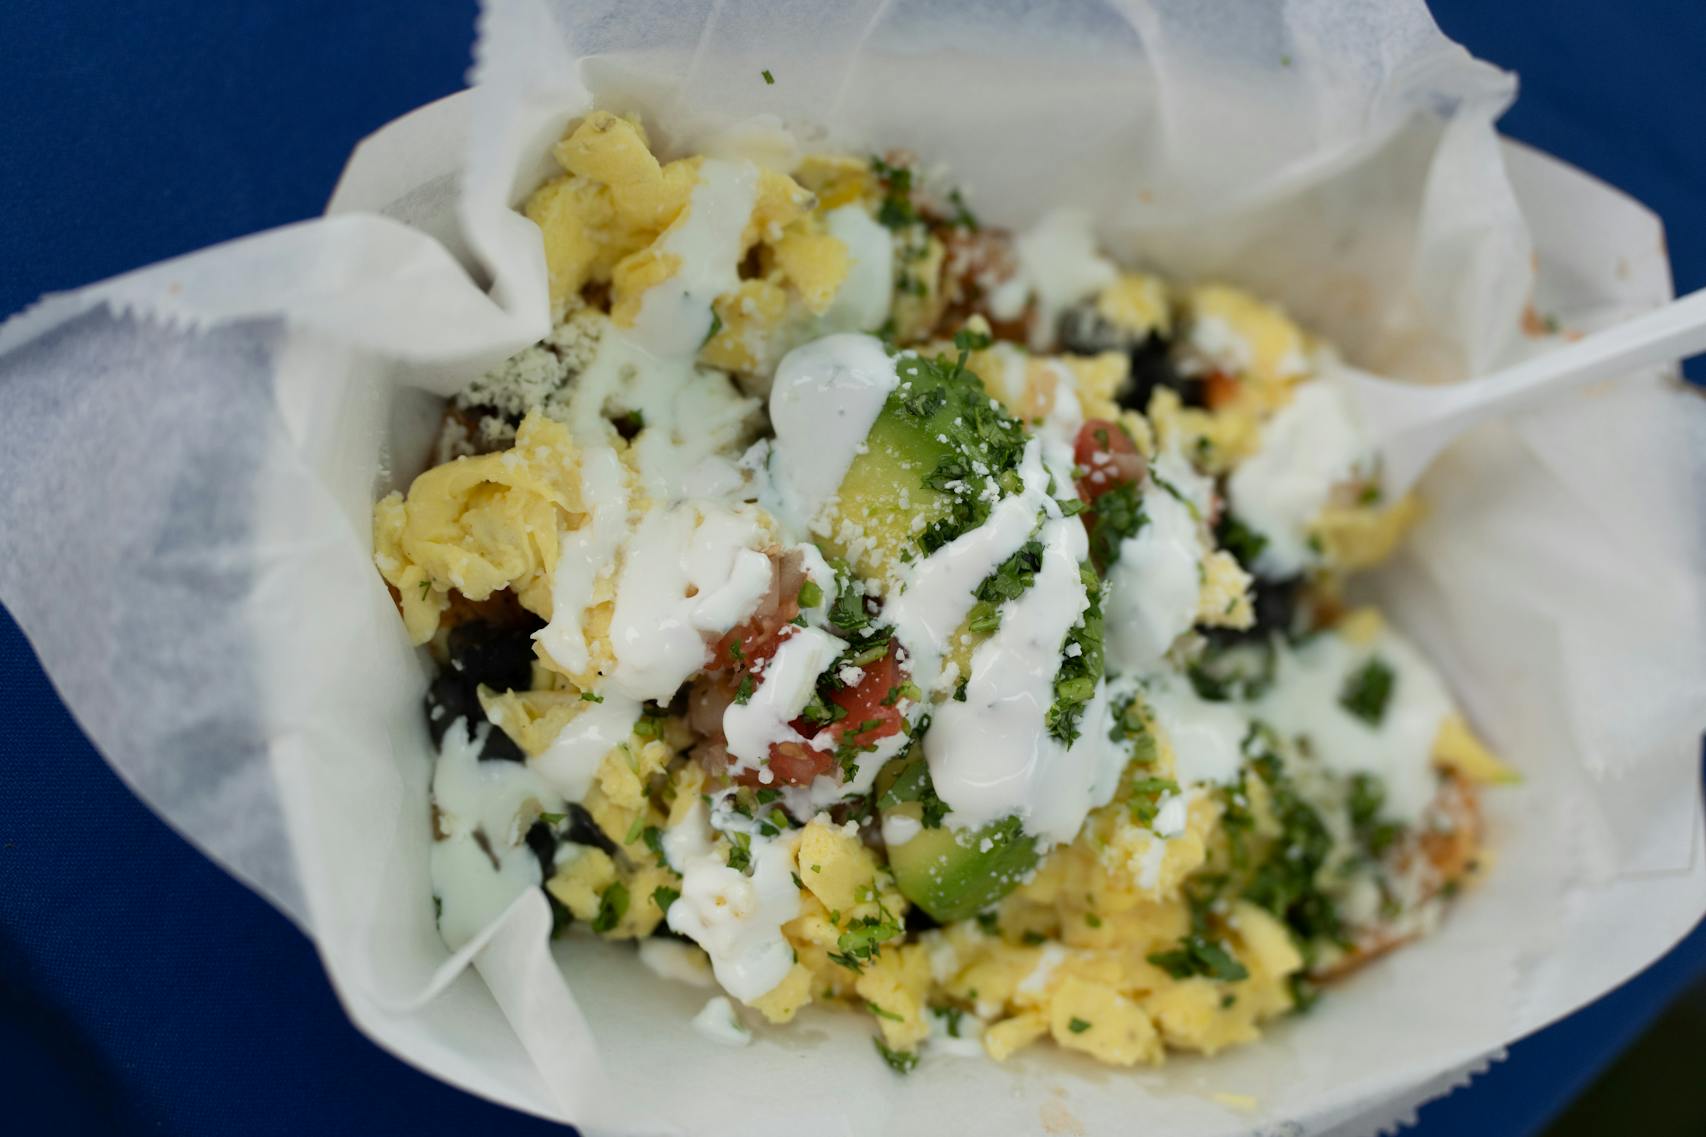 Chilaquiles Breakfast from Tejas Express. New foods at the Minnesota State Fair photographed on Thursday, Aug. 25, 2022 in Falcon Heights, Minn. ] RENEE JONES SCHNEIDER • renee.jones@startribune.com